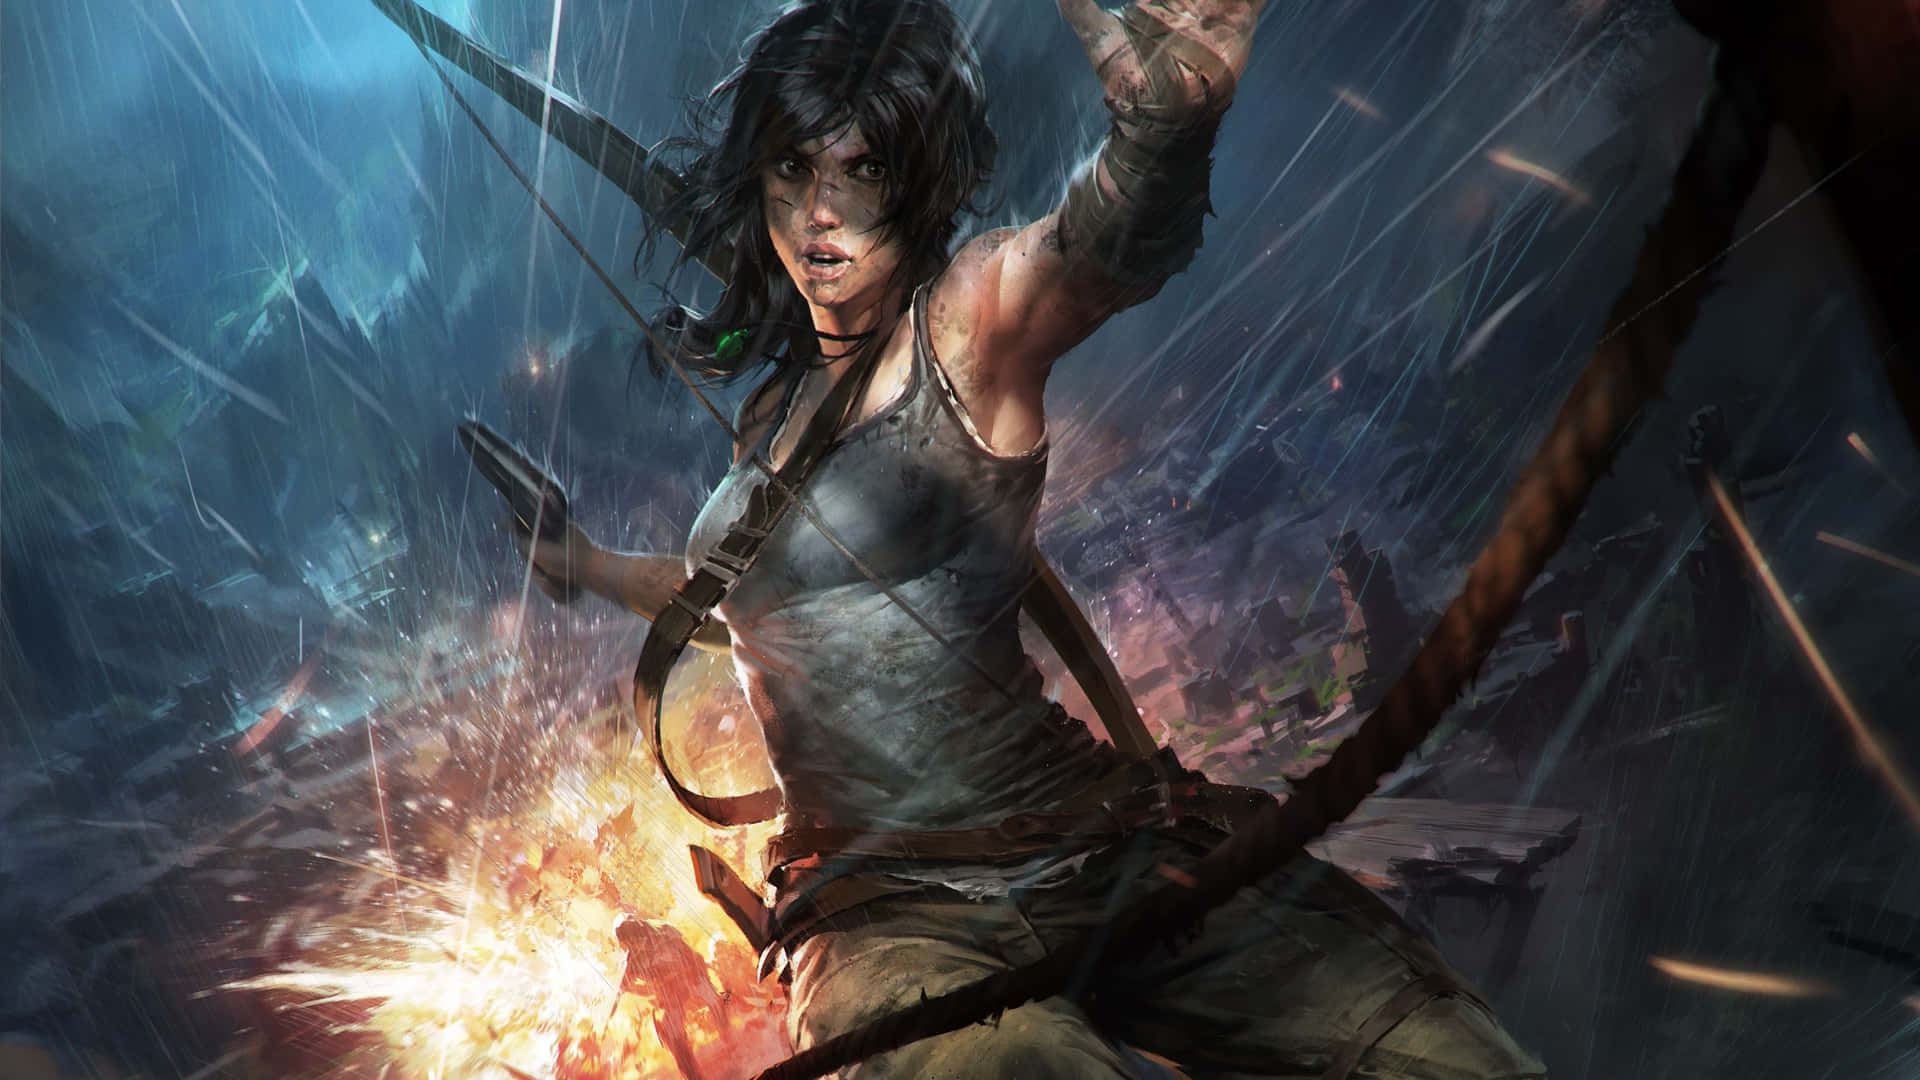 The Tomb Raider Is In The Air With A Bow And Arrow